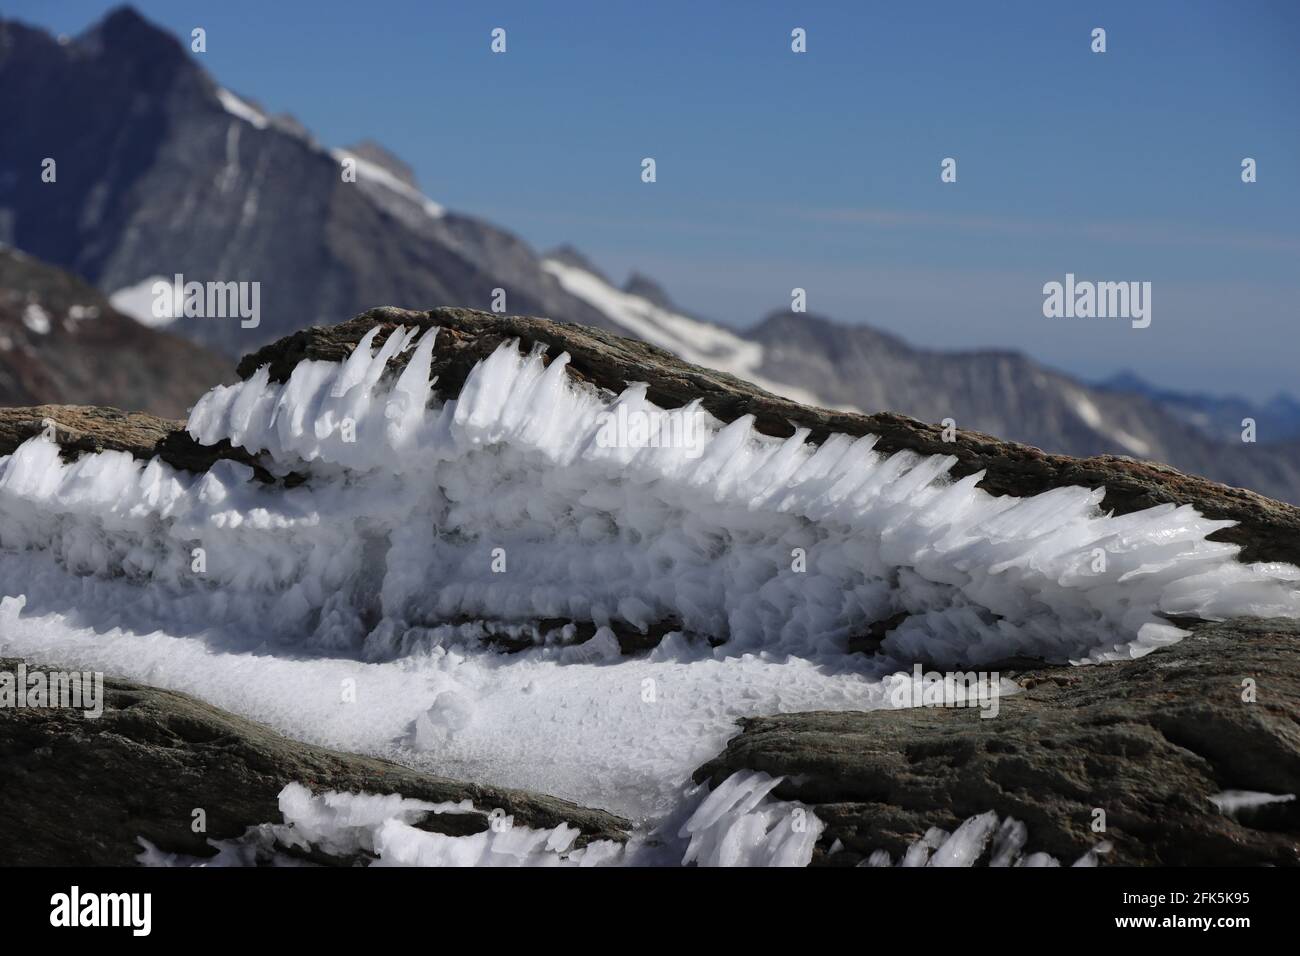 Small rock cave with ice needles. Jungfraujoch, Swiss Alps. Stock Photo